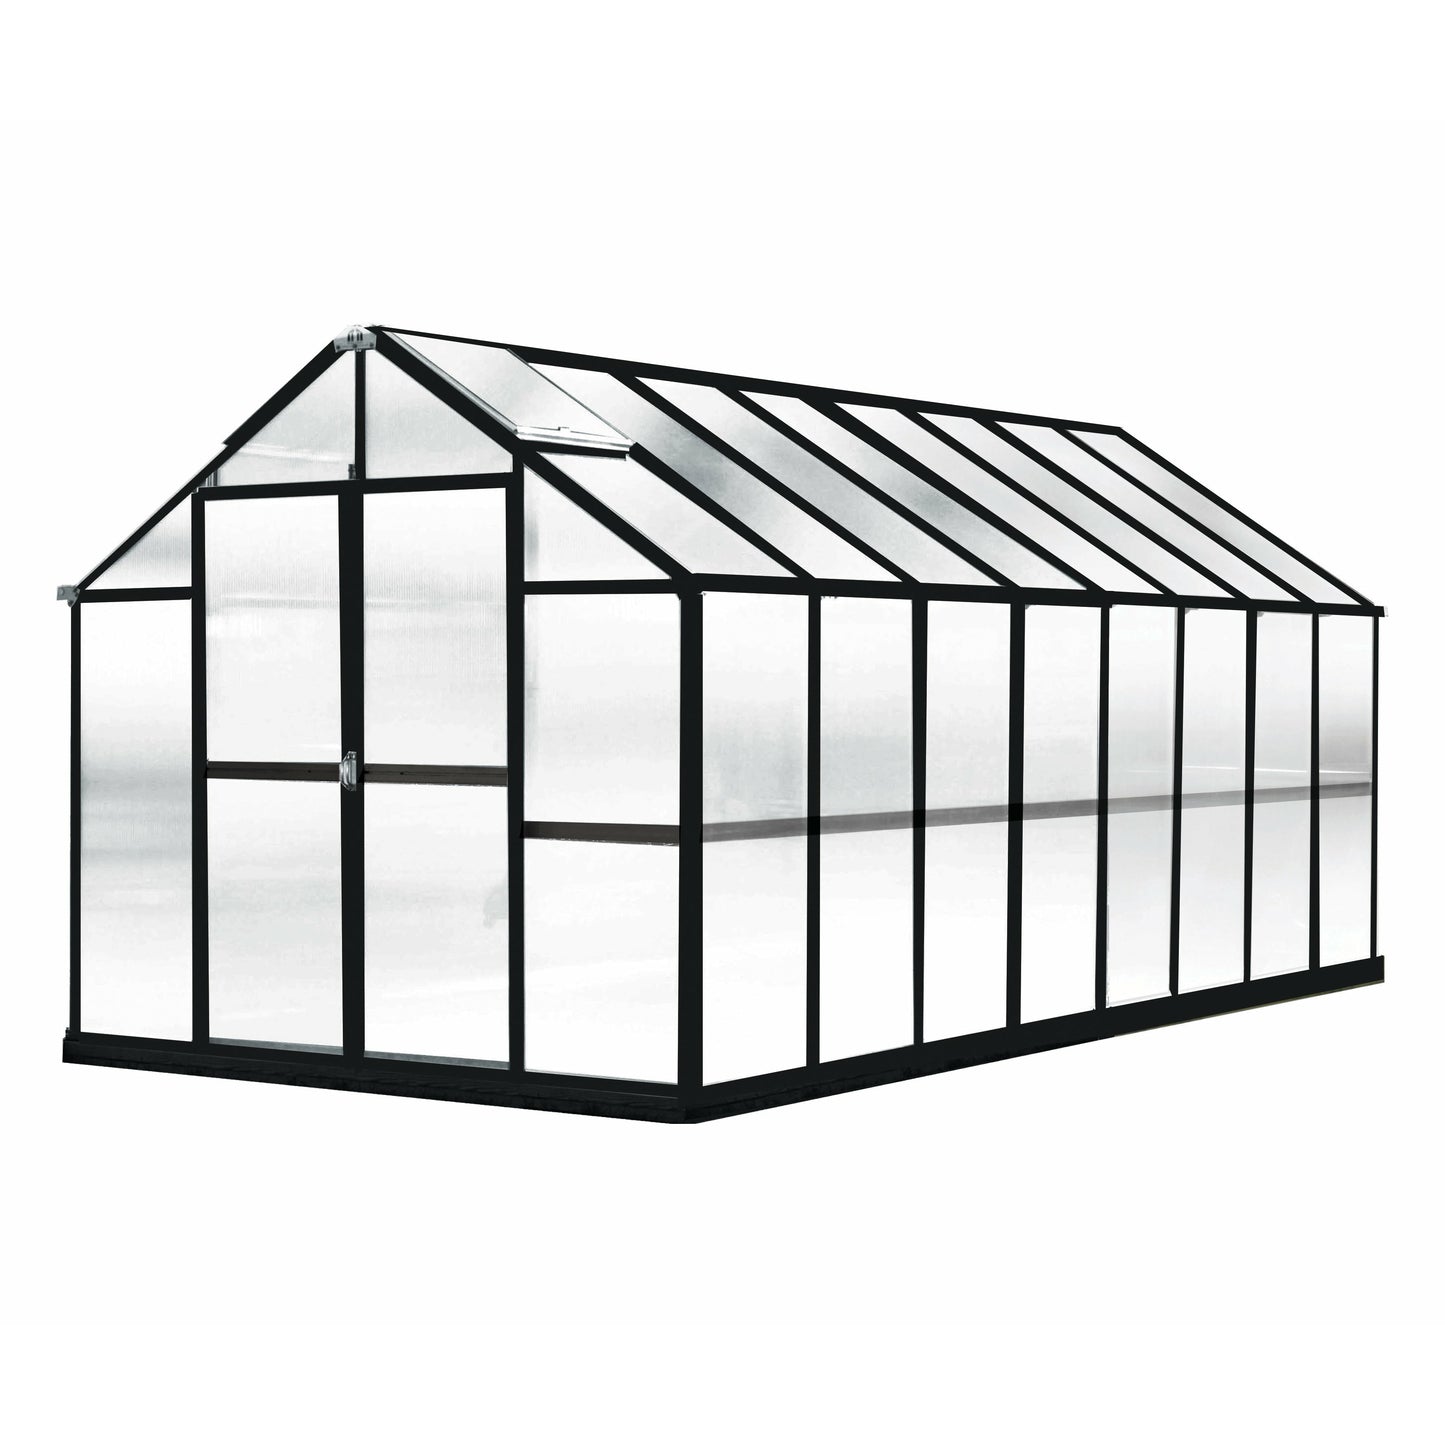 Mont Growers Edition Greenhouse 8FTx 16FT - Black Finish MONT-16-BK-GROWERS